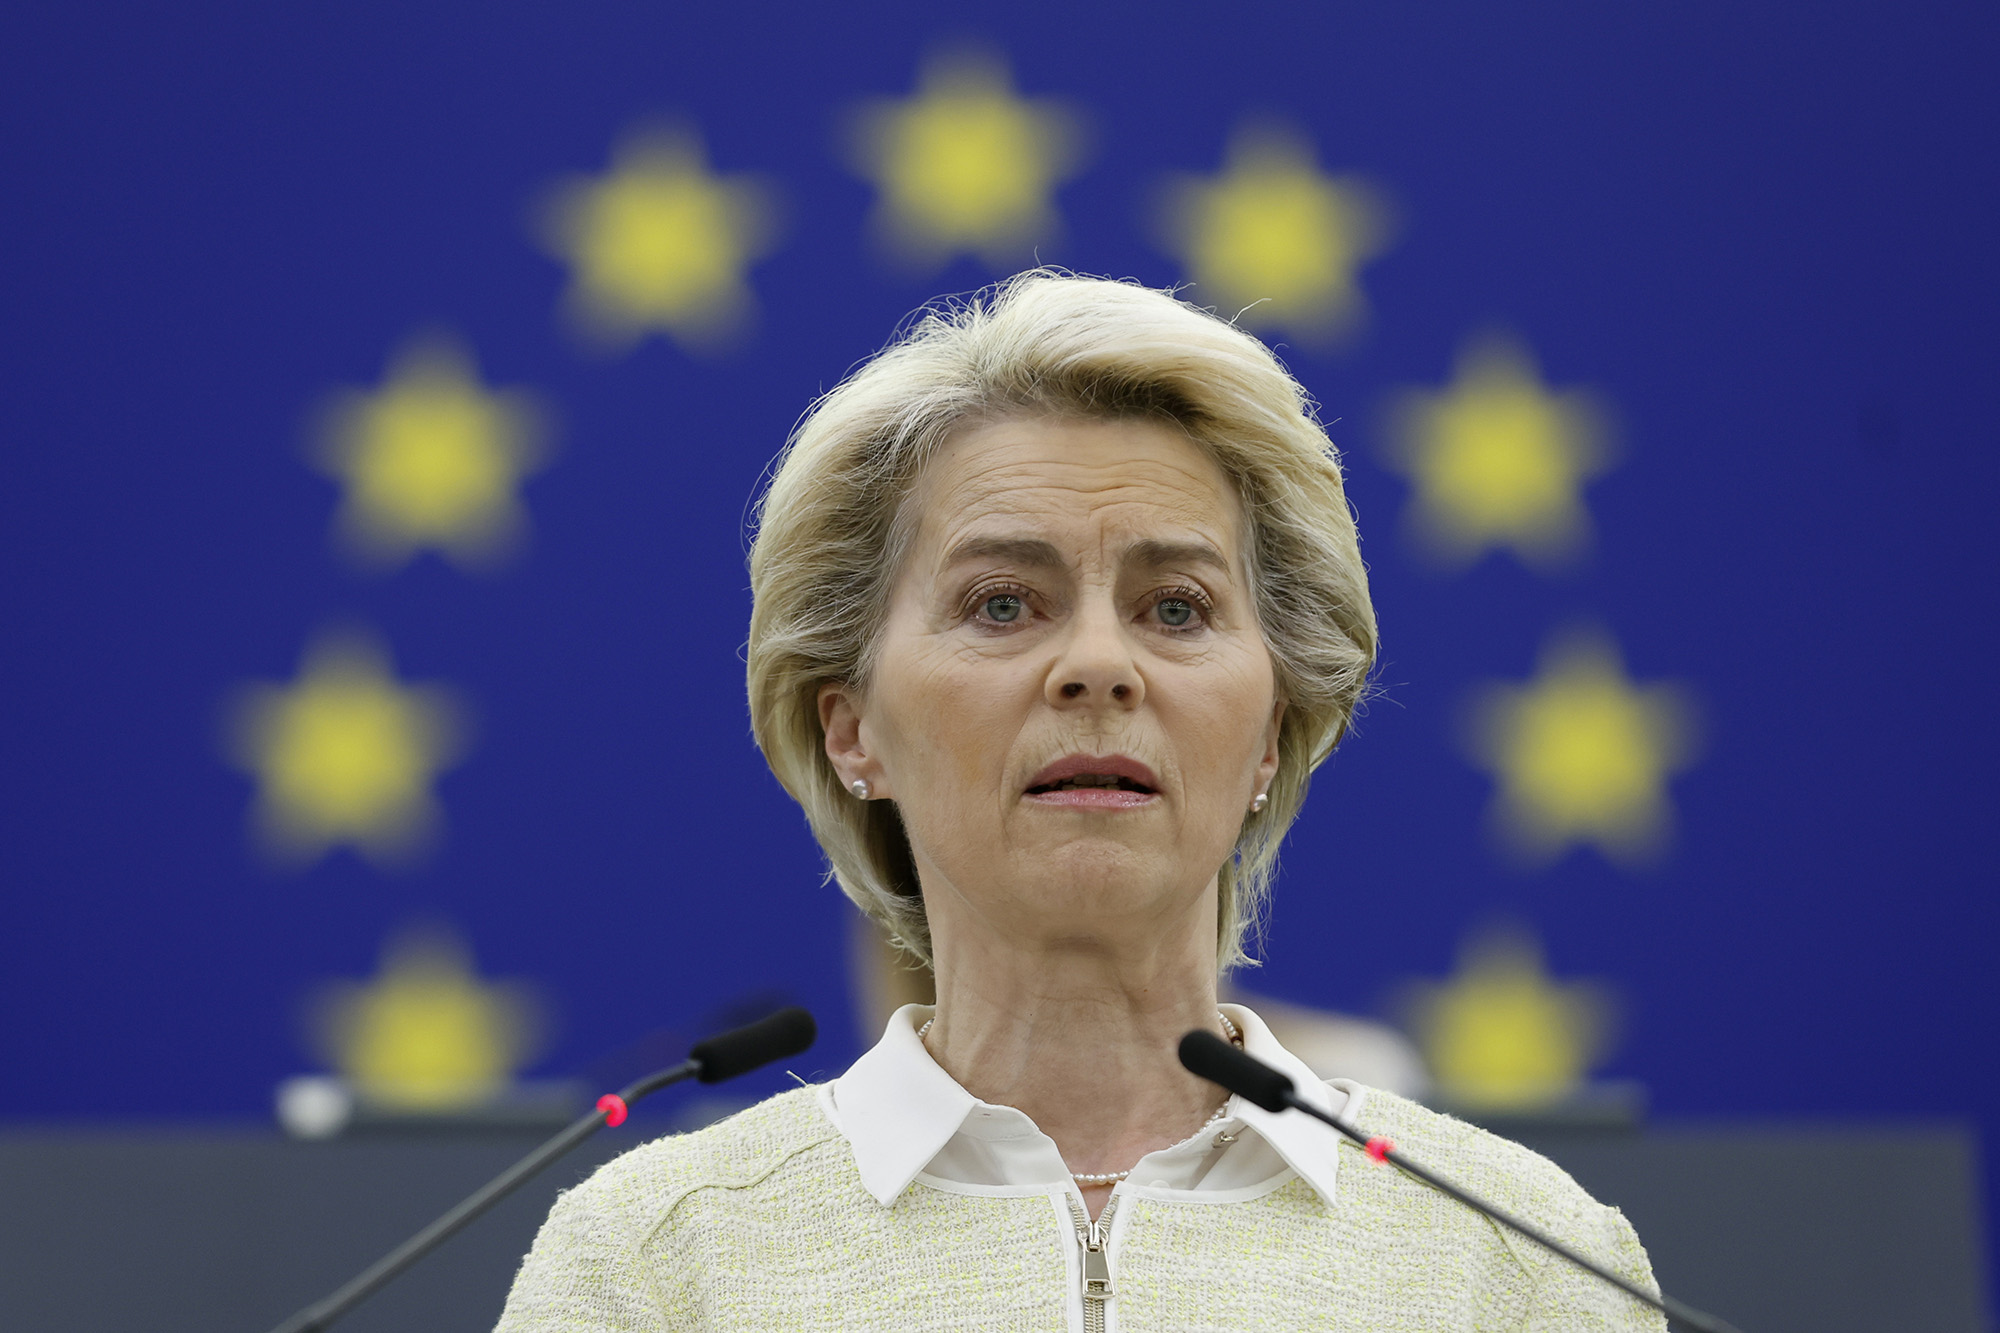 European Commission President Ursula von der Leyen delivers her speech during a debate on the social and economic consequences for the EU of the Russian war in Ukraine, on May 4, at the European Parliament in Strasbourg, France. The European Union's leader on Wednesday called on the 27-nation bloc to ban oil imports from Russia in a sixth package of sanctions targeting Moscow for its war in Ukraine. 